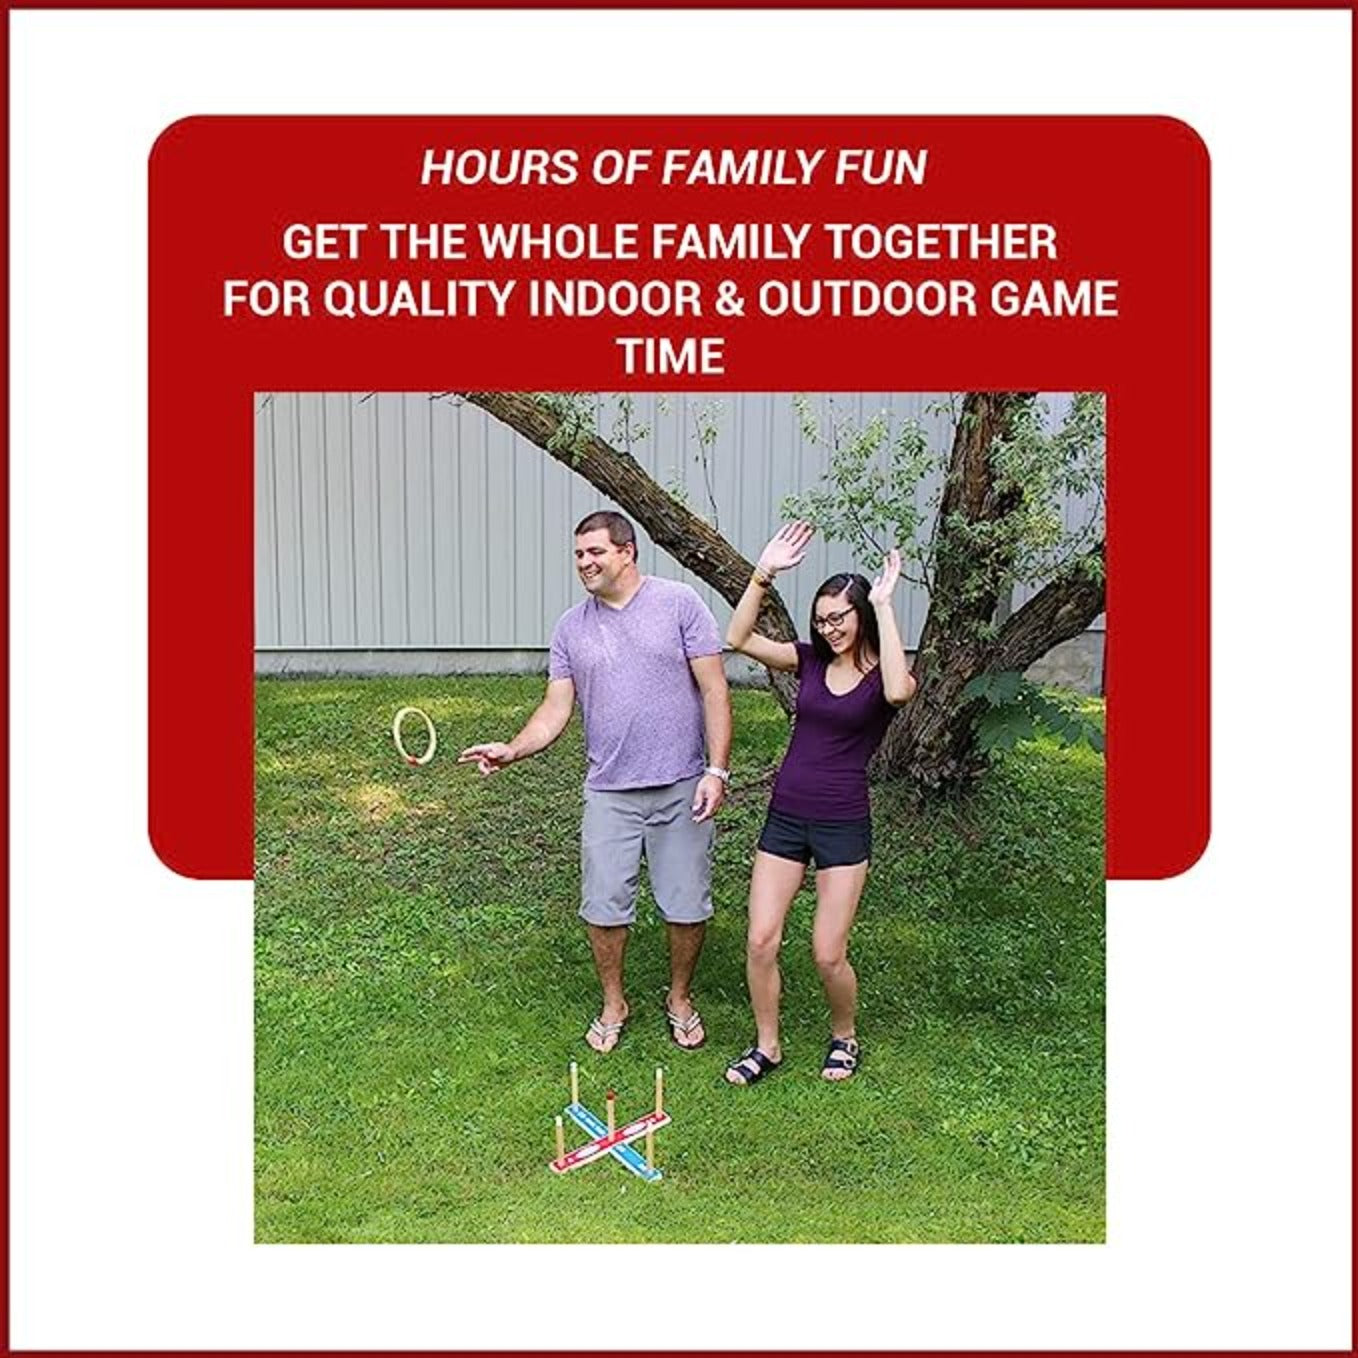 Washer Toss, Portable, Washers, Cornhole Boards, Portable Cornhole, Outdoor  Games, Games for Kids, Drinking Games, Games, Free Shipping 